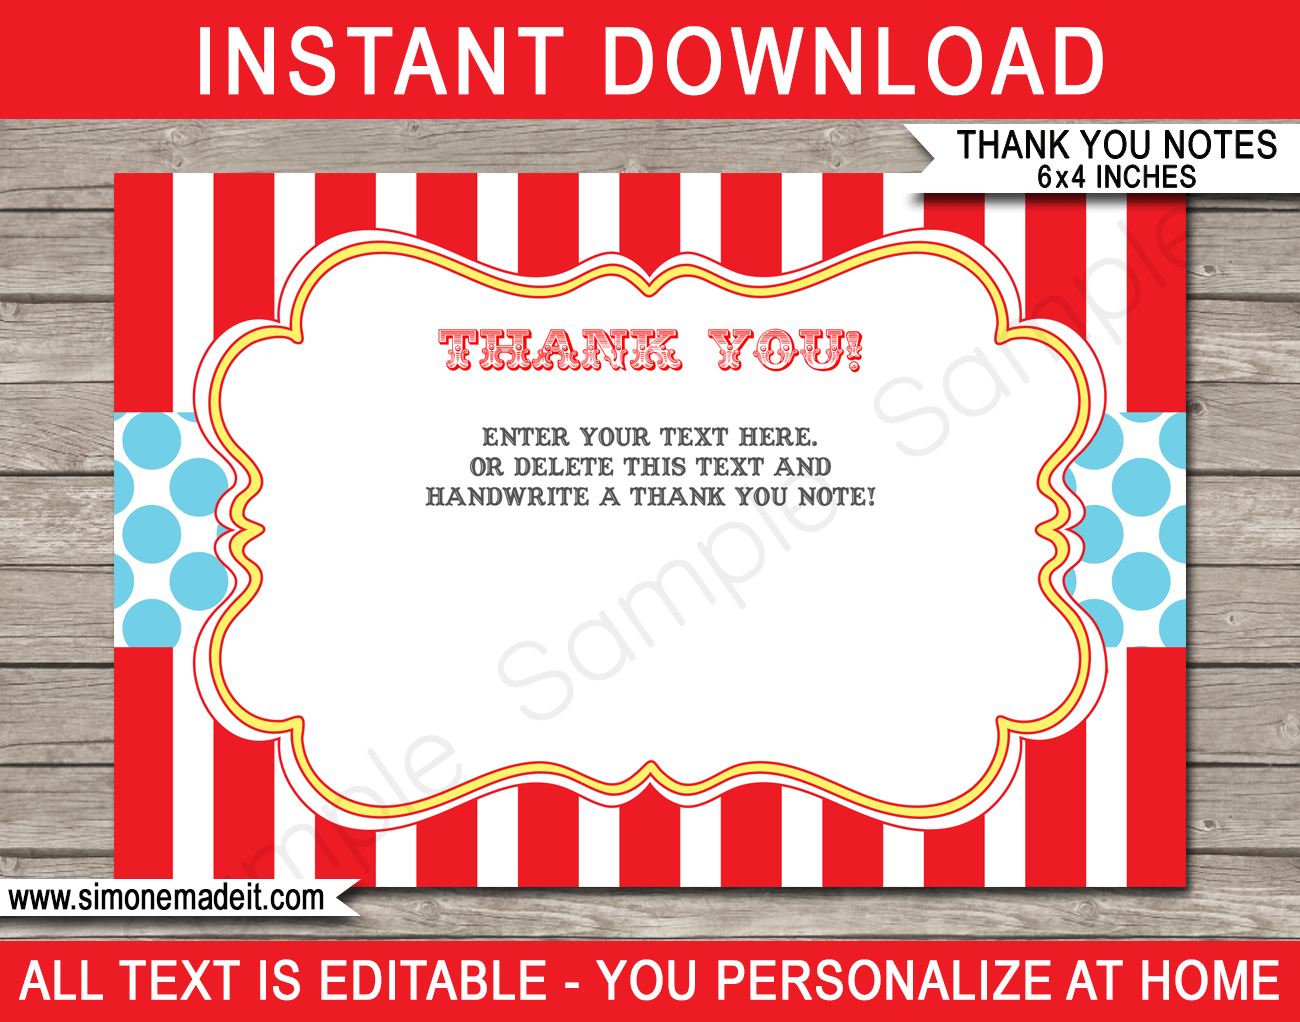 Printable Circus Party Thank You Cards - Favor Tags - Circus or Carnival Birthday Party theme - Editable Template - Instant Download via simonemadeit.com